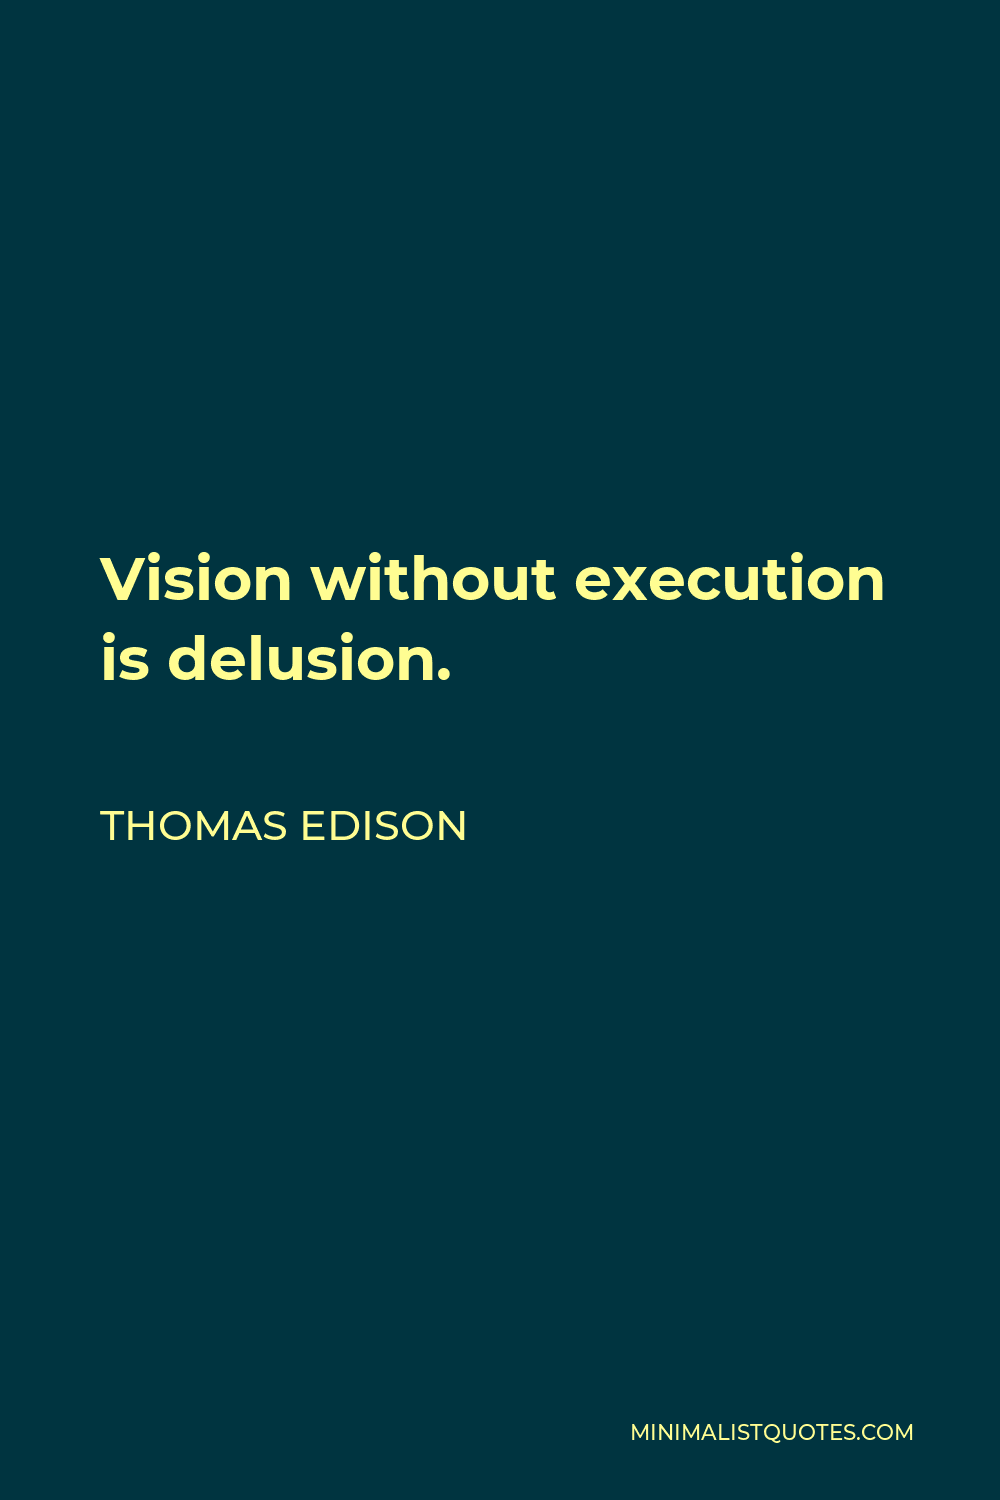 Thomas Edison Quote - Vision without execution is delusion.